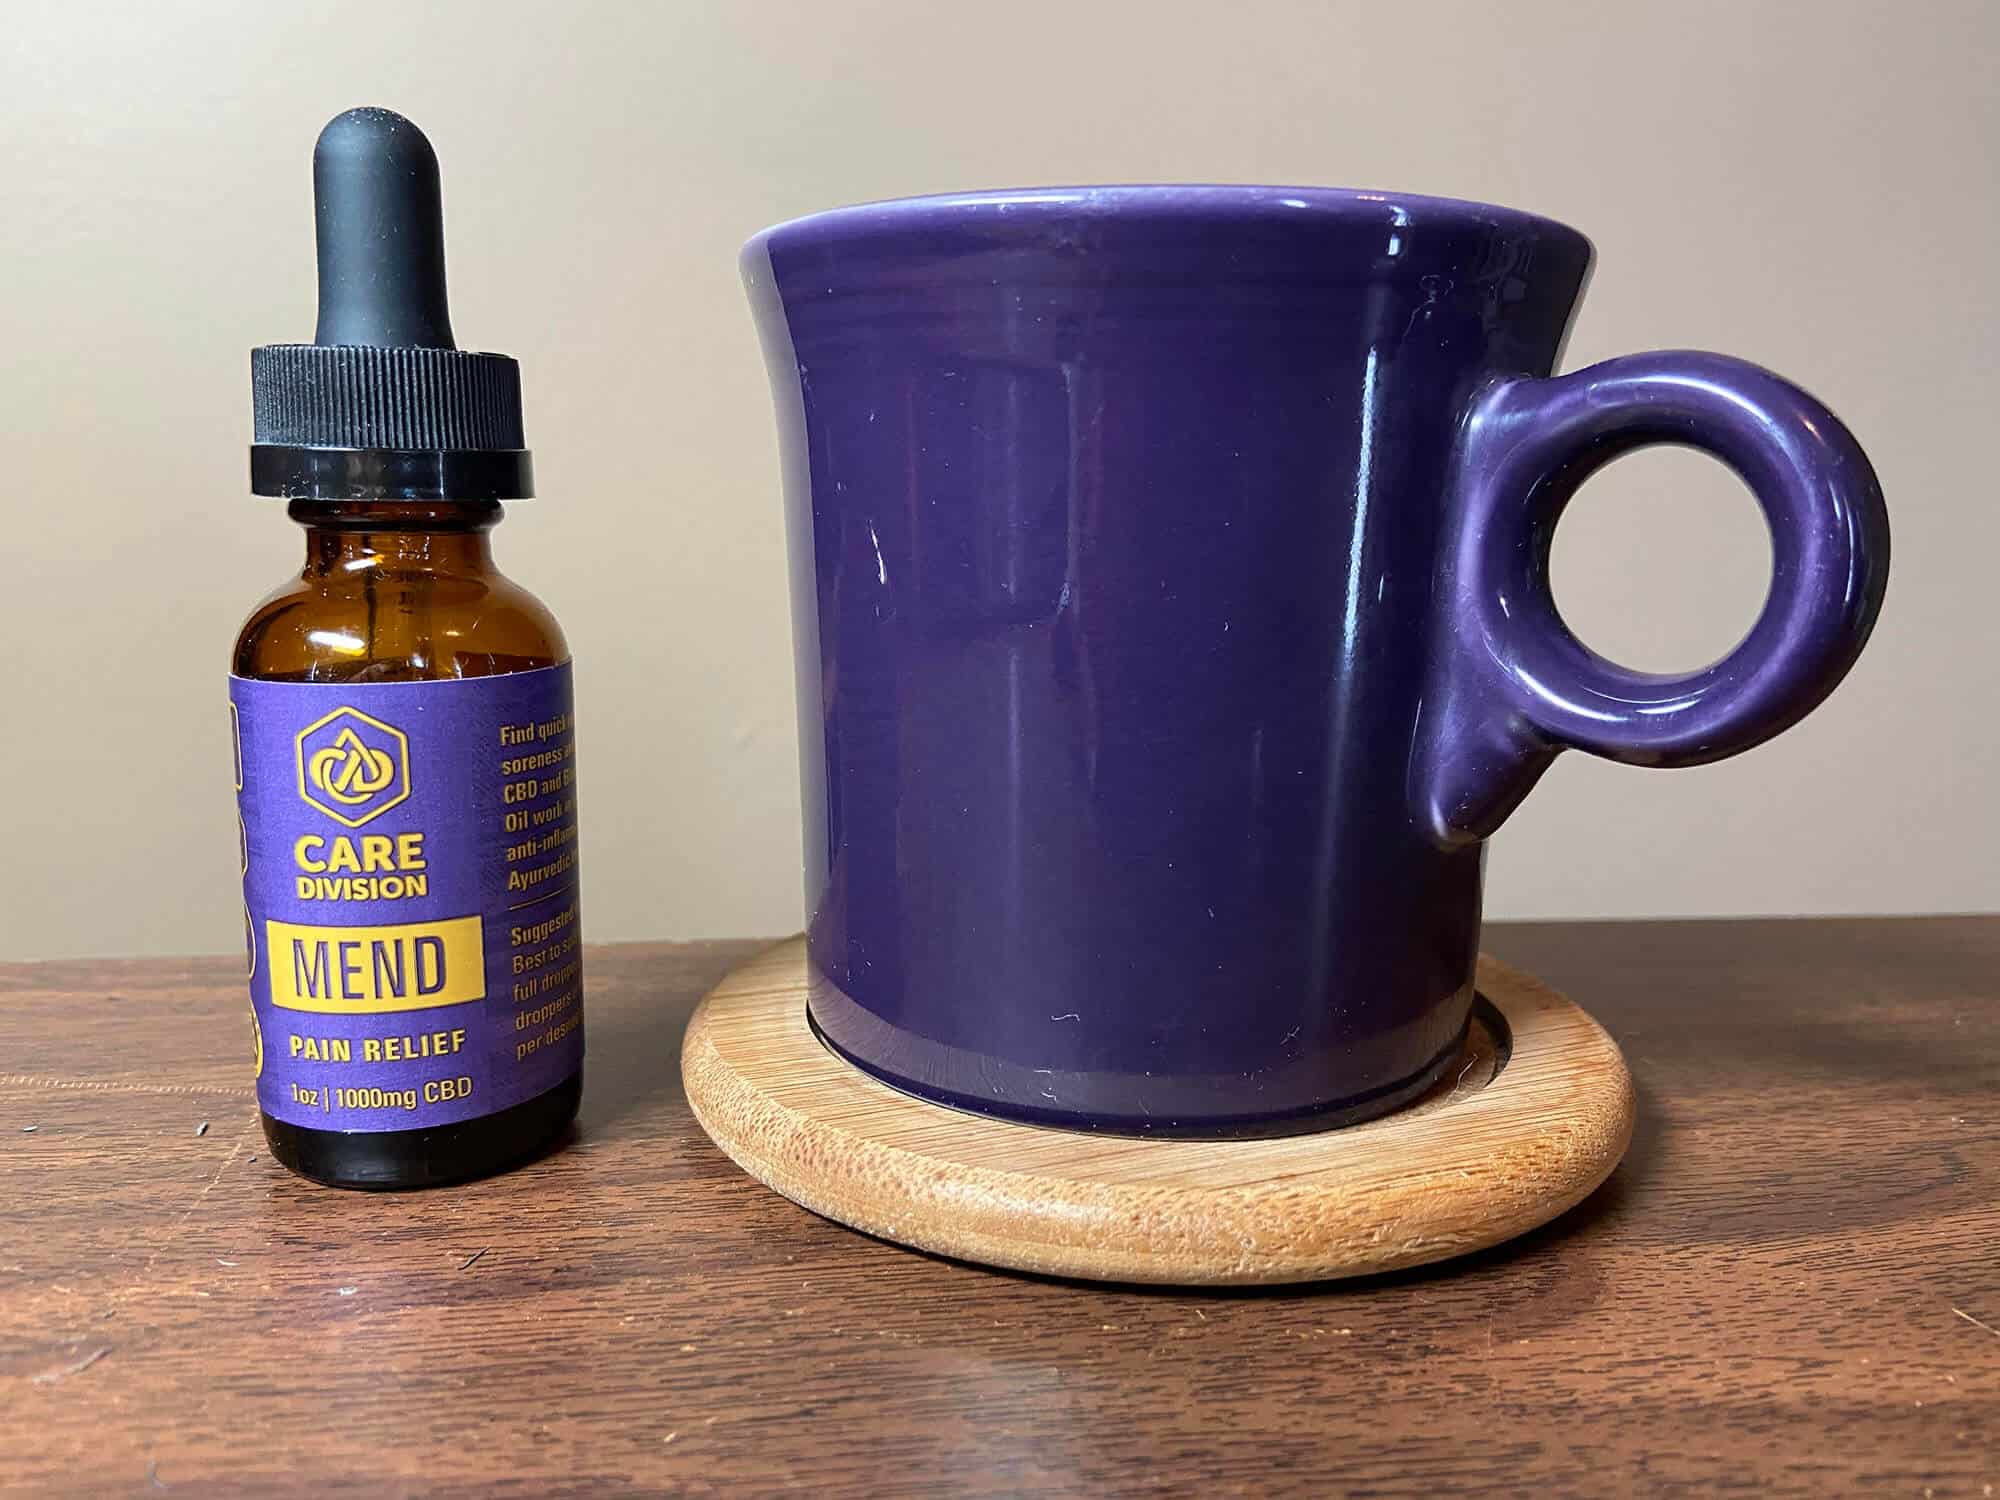 Care Division 1000mg Mend CBD Tincture Review